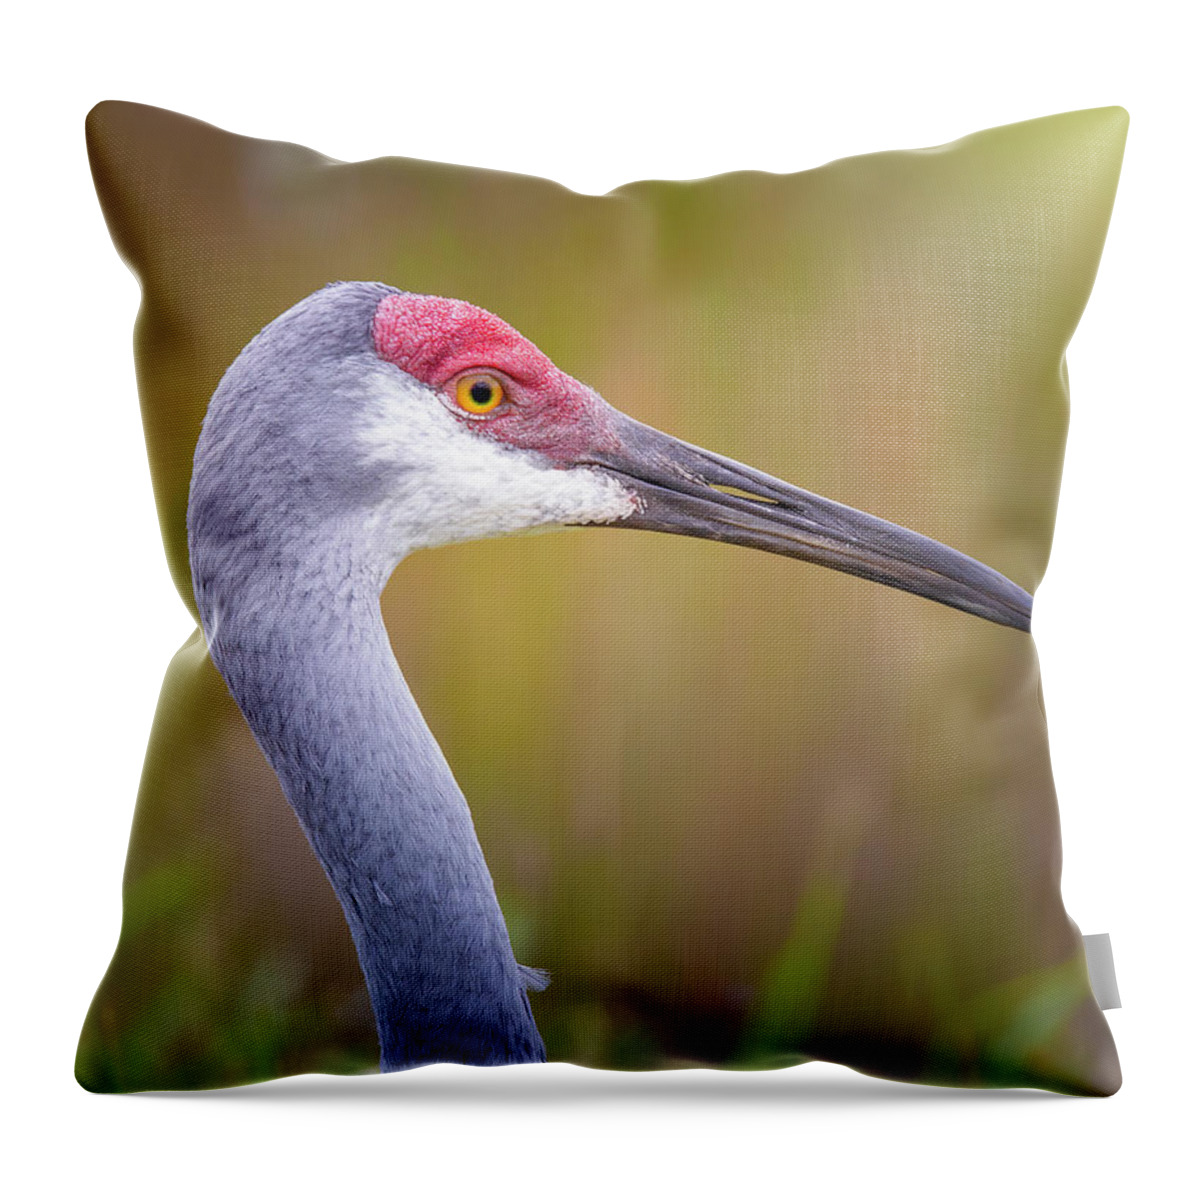 Sandhill Crane Throw Pillow featuring the photograph Portrait of a Sandhill Crane by Mark Andrew Thomas